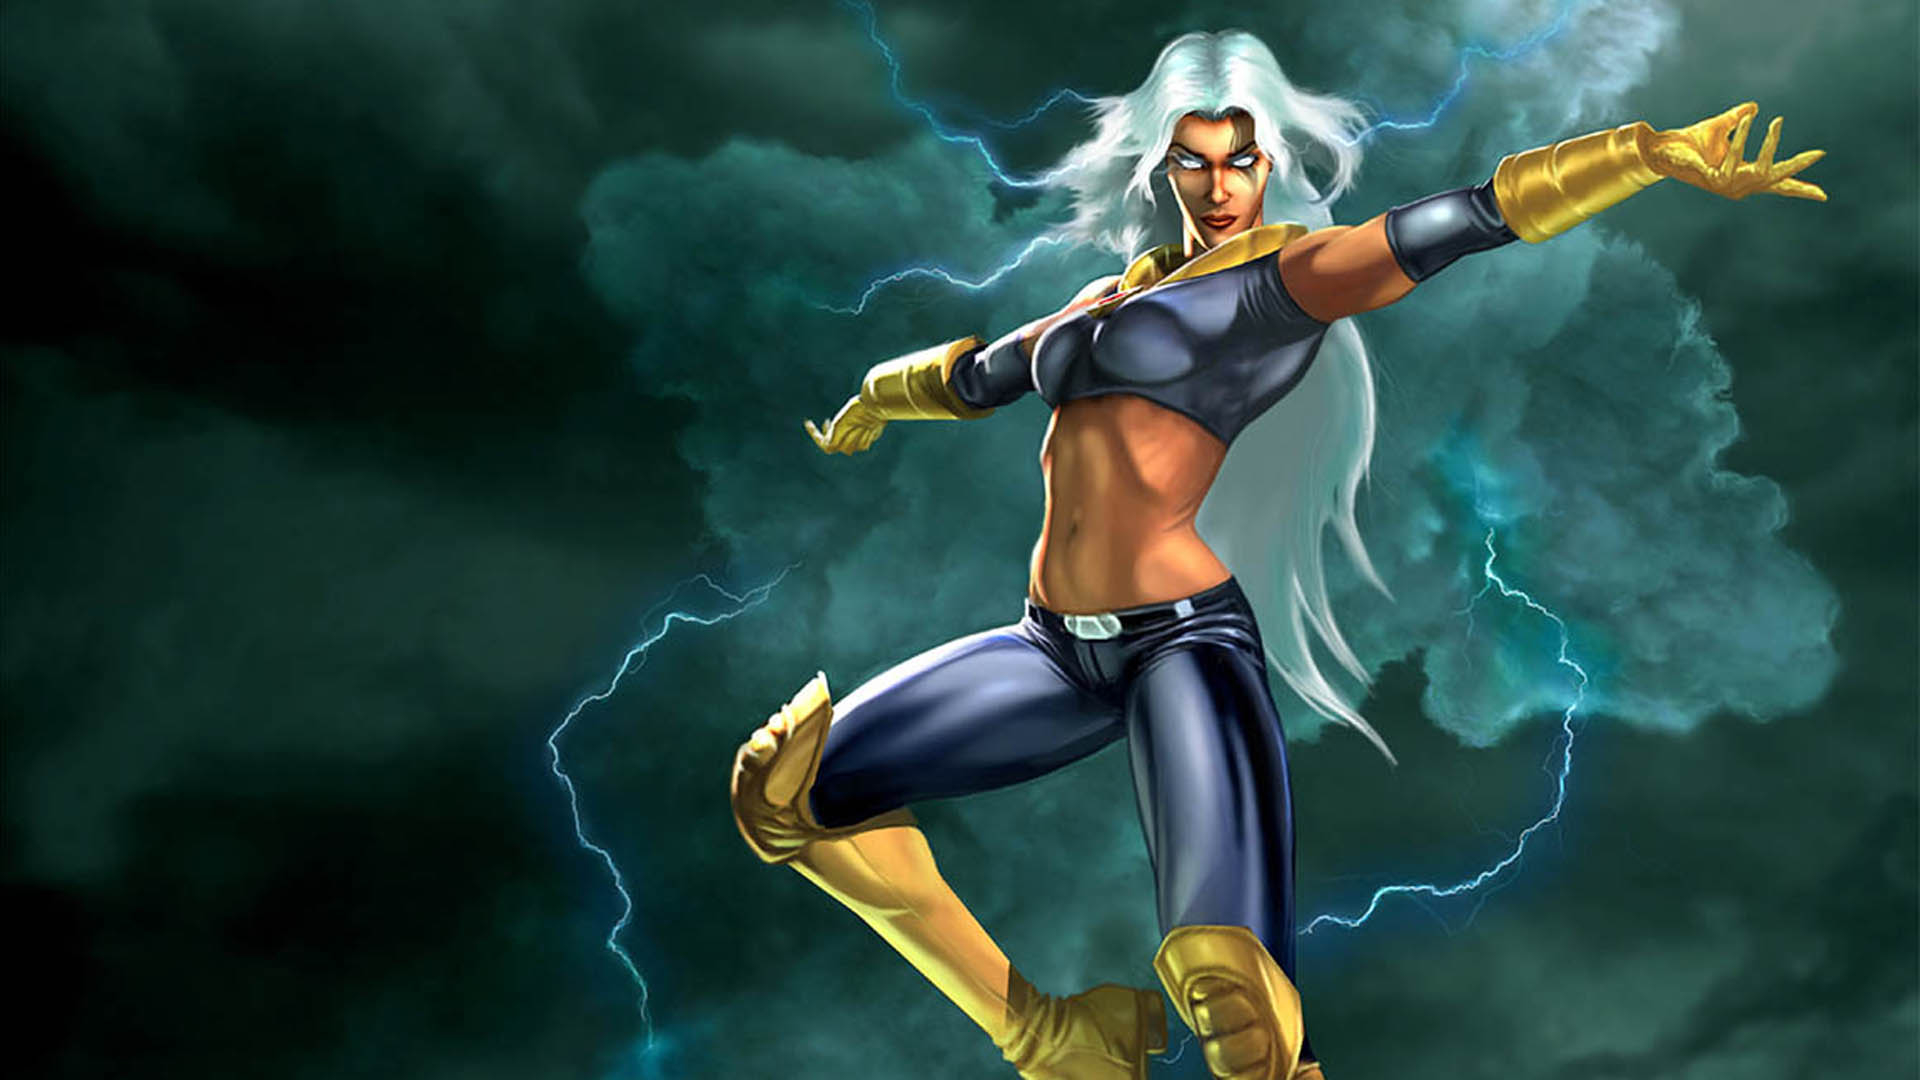 1920x1080 150+ Storm (Marvel Comics) HD Wallpapers and Backgrounds